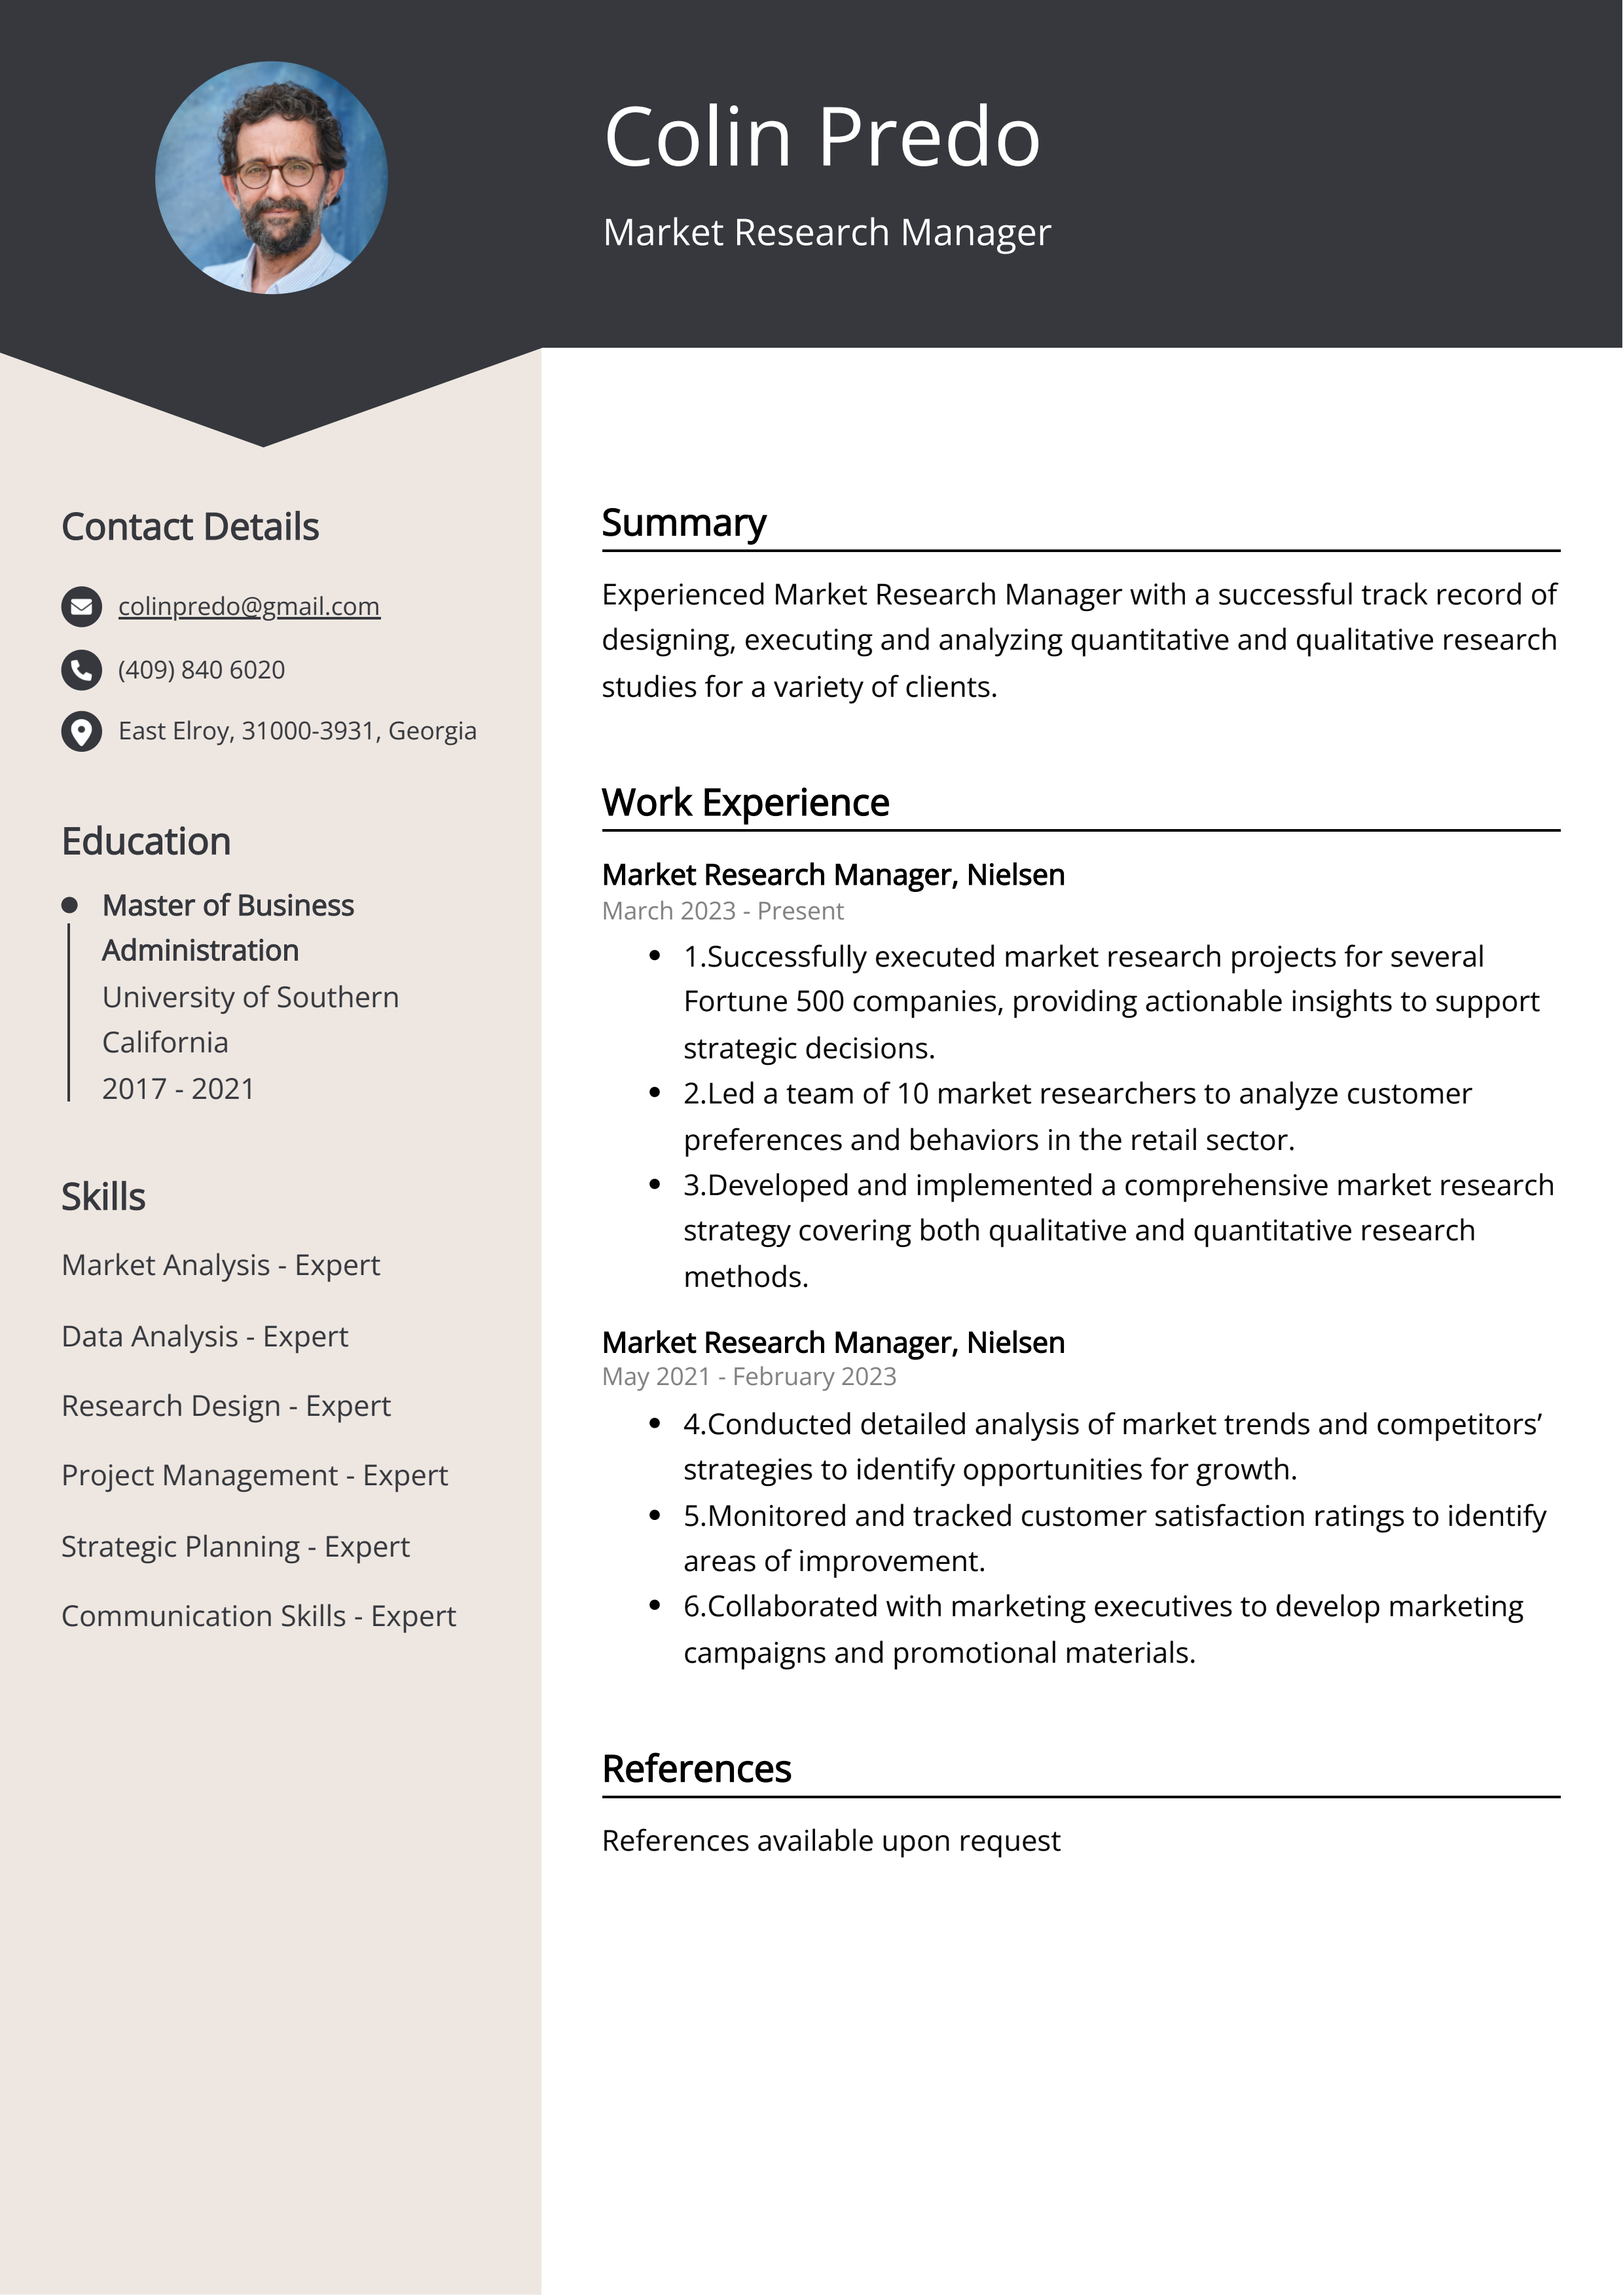 Market Research Manager Resume Example